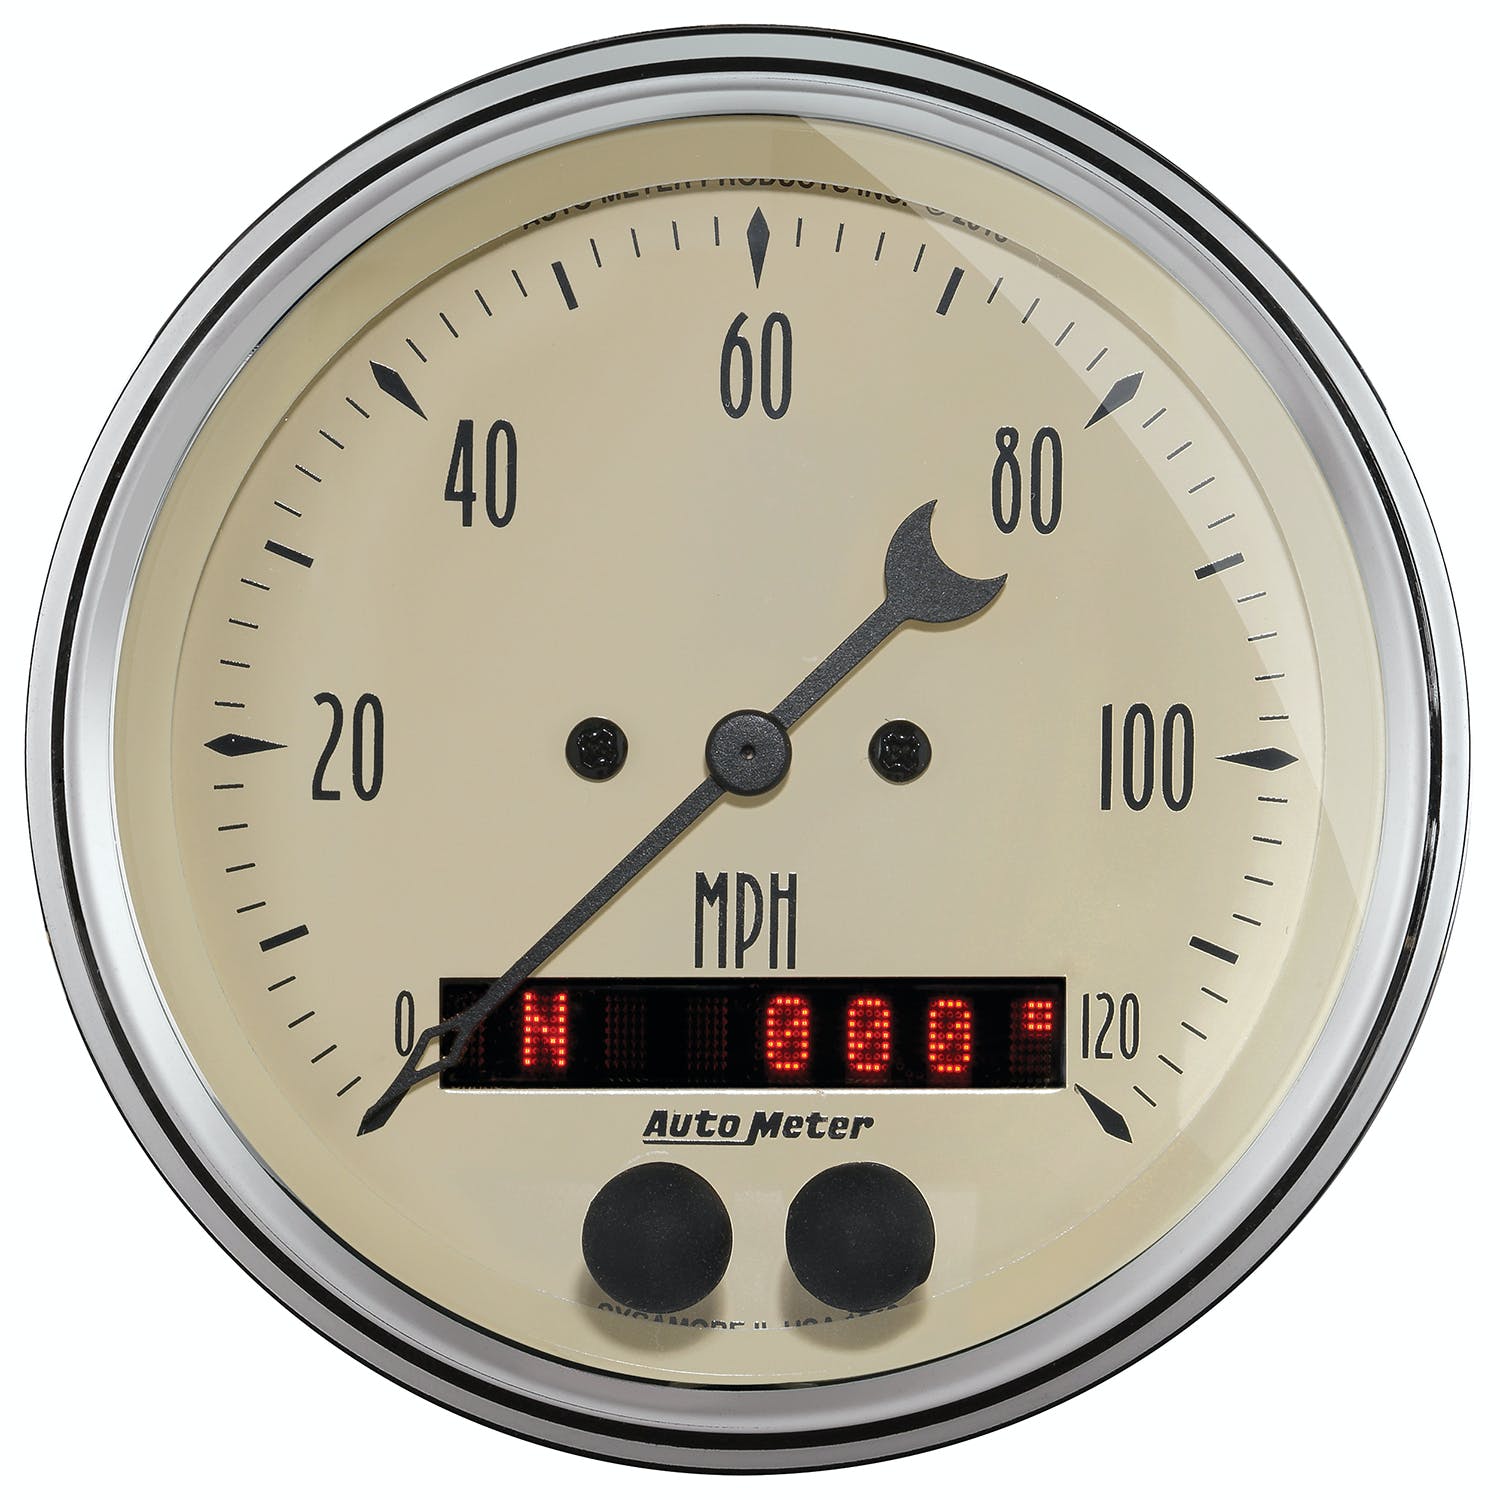 AutoMeter Products 1849 GPS Speedometer, Antique Beige 120 mph